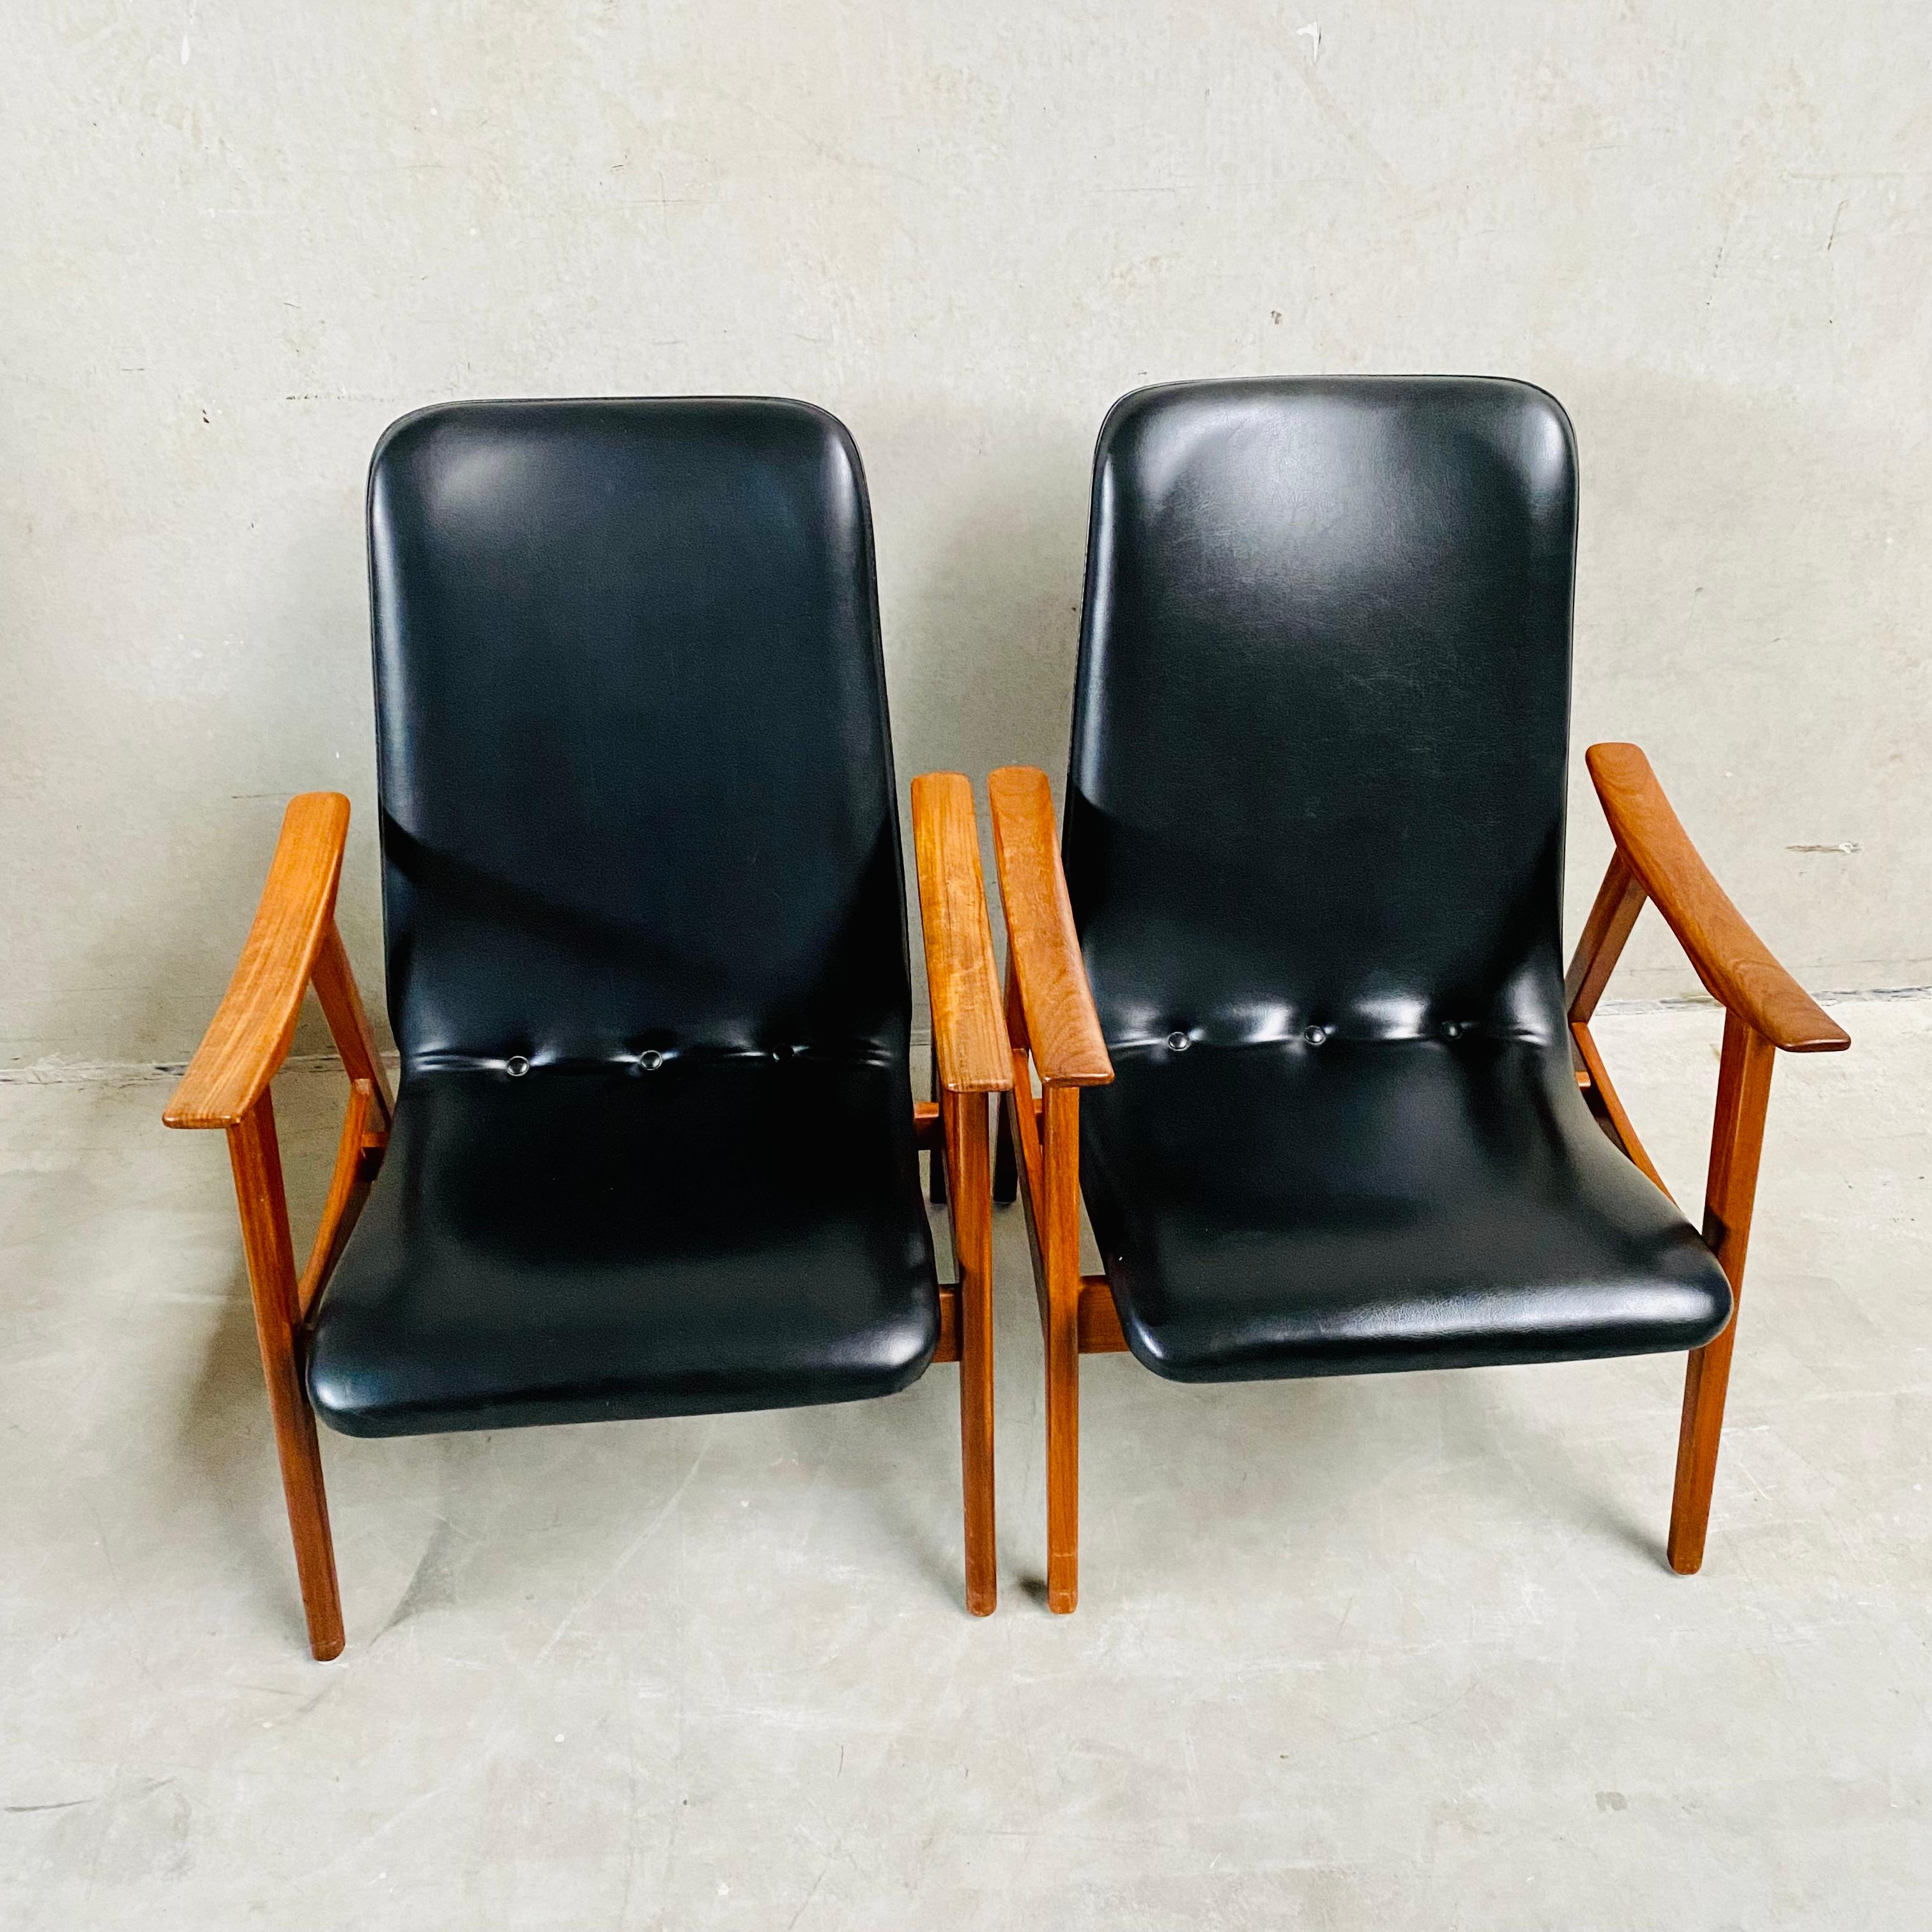 Mid-20th Century Set of Two Louis Van Teeffelen for Webe Lounge Chairs, Netherlands, 1960s For Sale